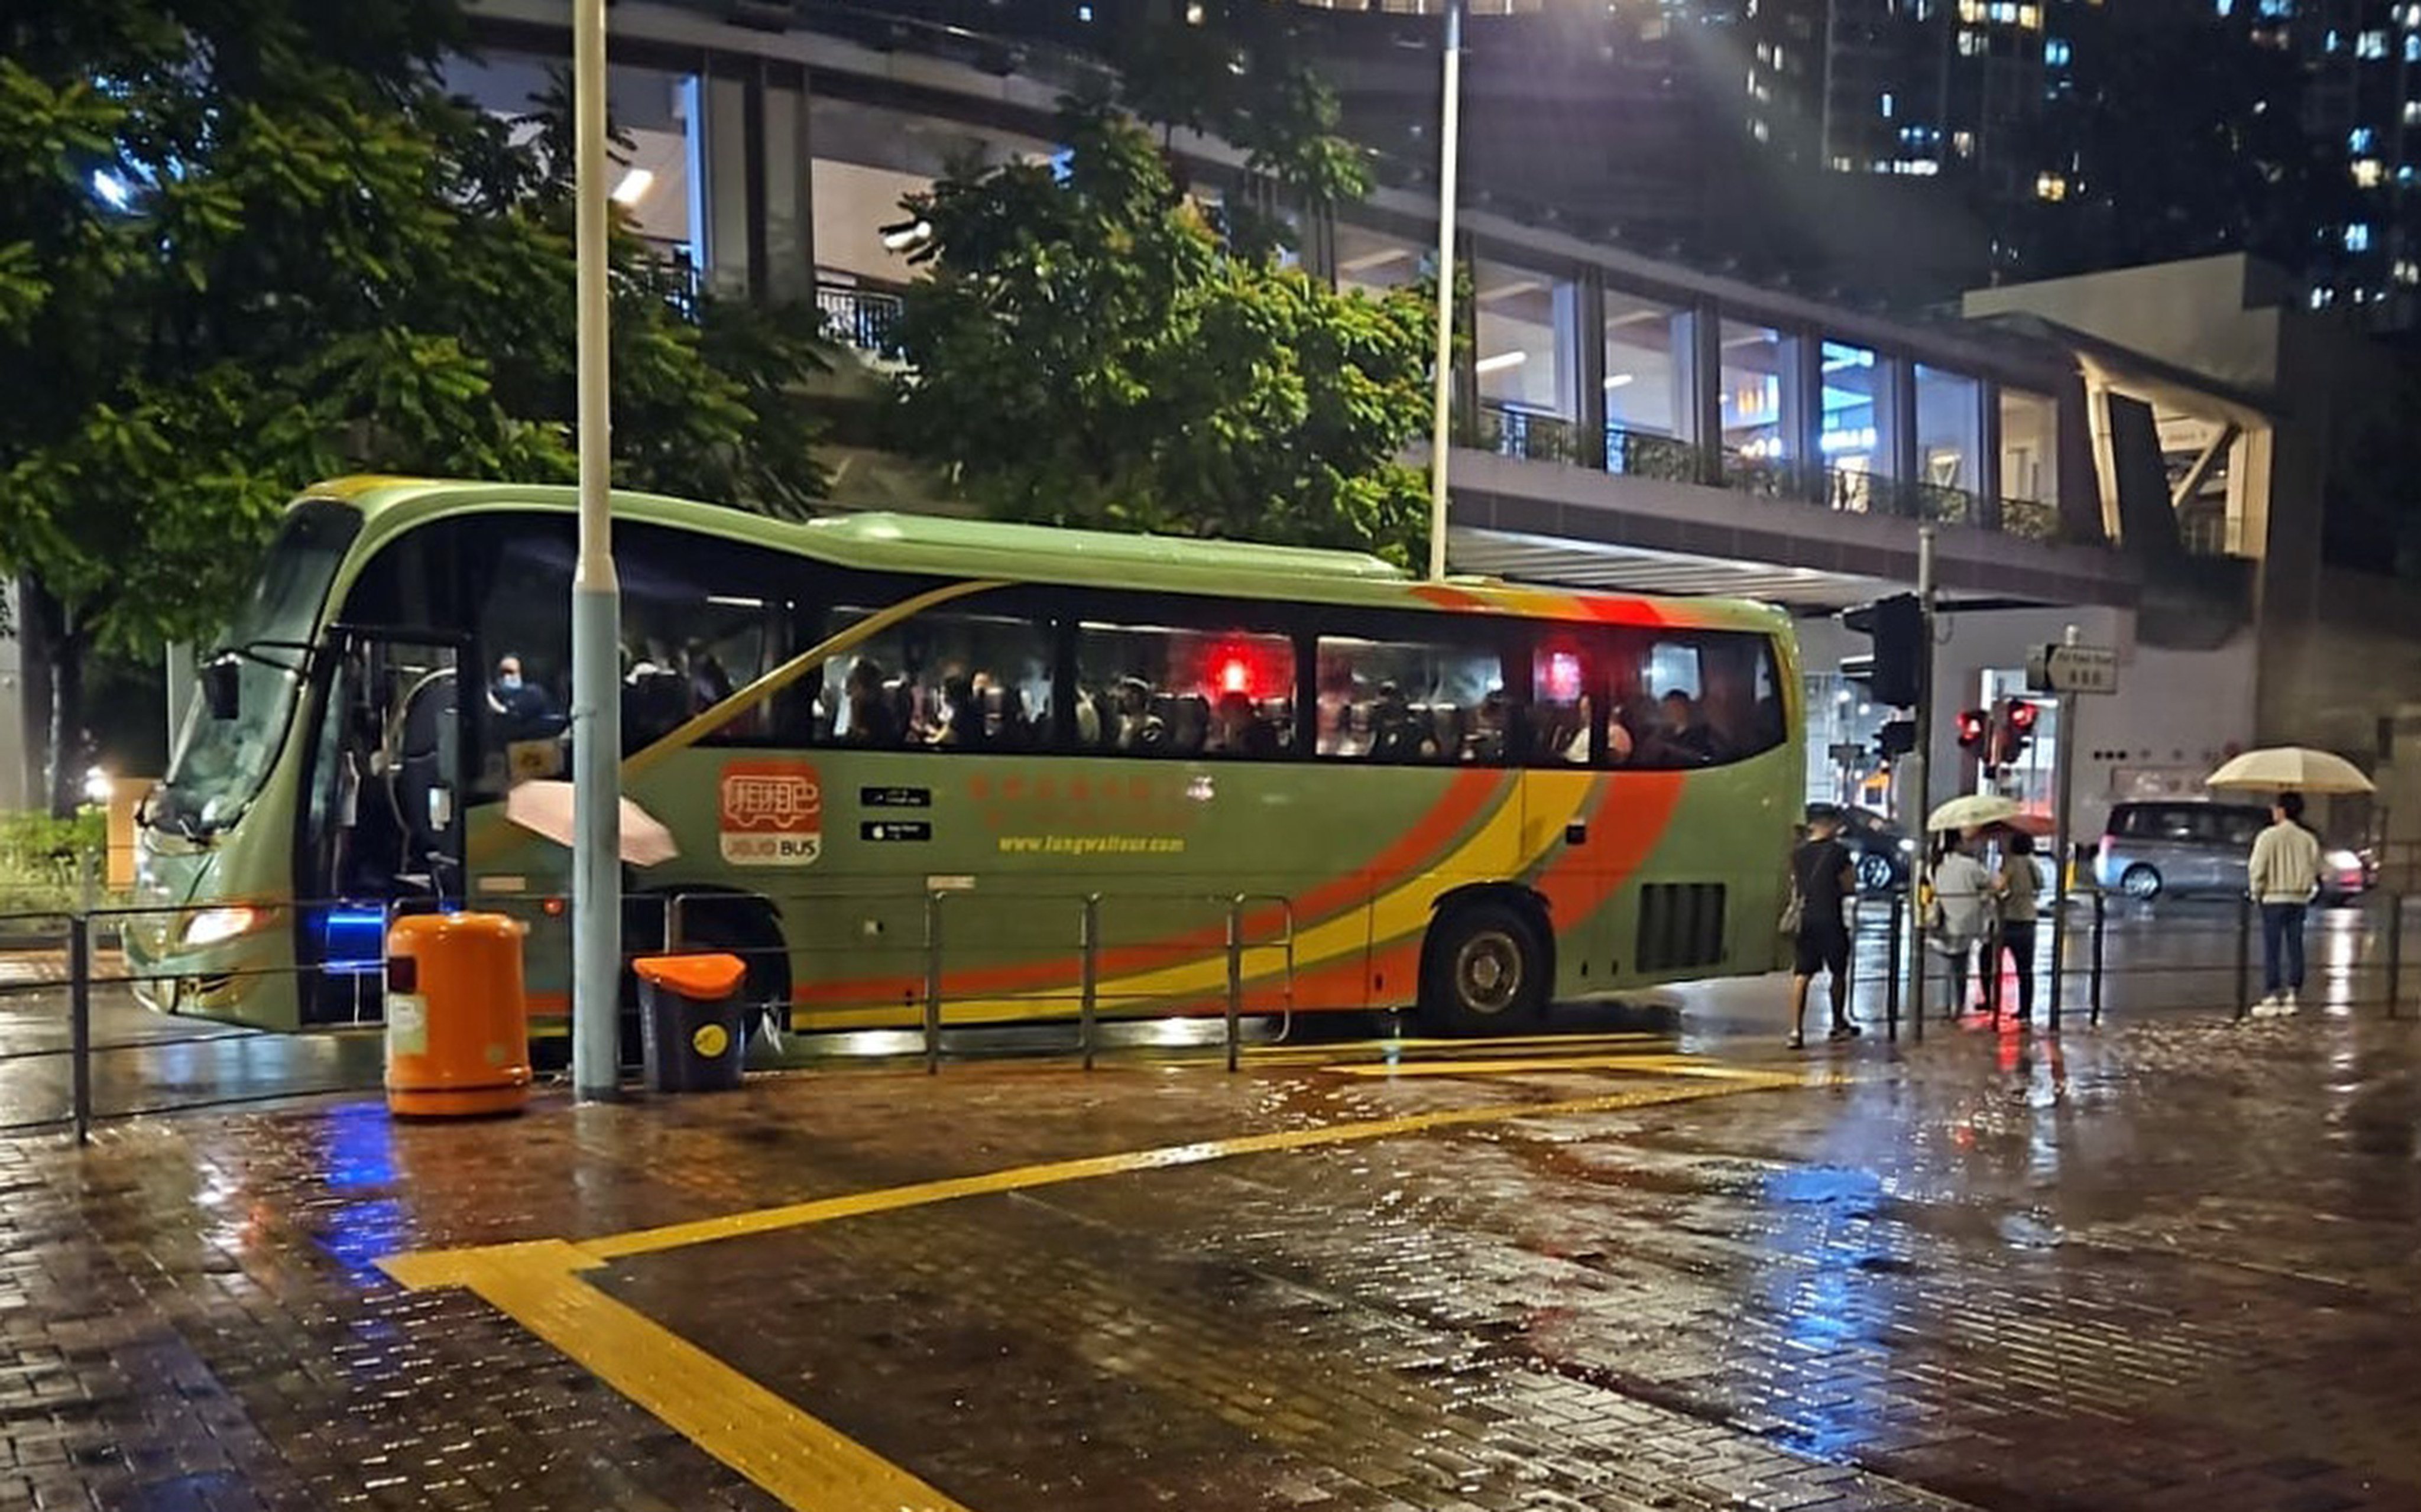 Private coaches manned by volunteer drivers pick up passengers stranded by Typhoon Koinu at Tsuen Wan West MTR station. Photo: JoJo Bus